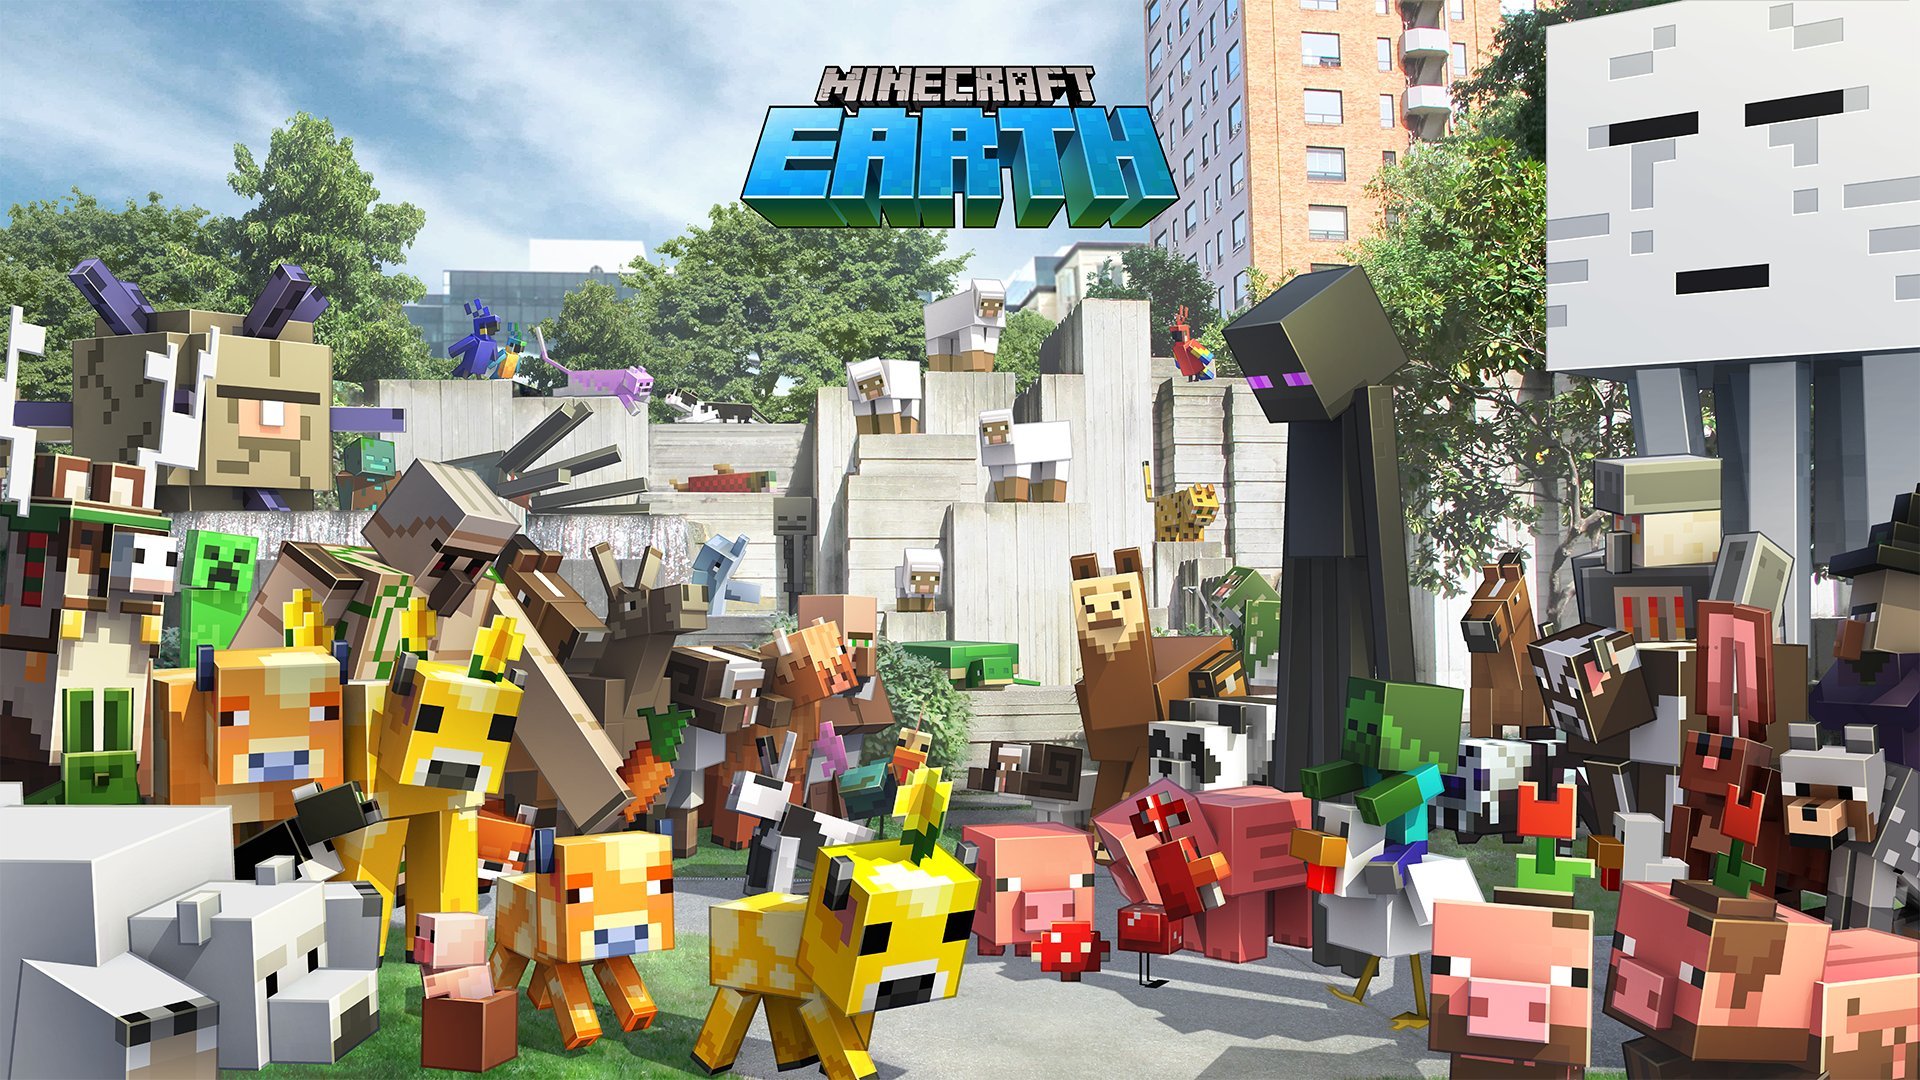 Will they bring Minecraft Earth back?